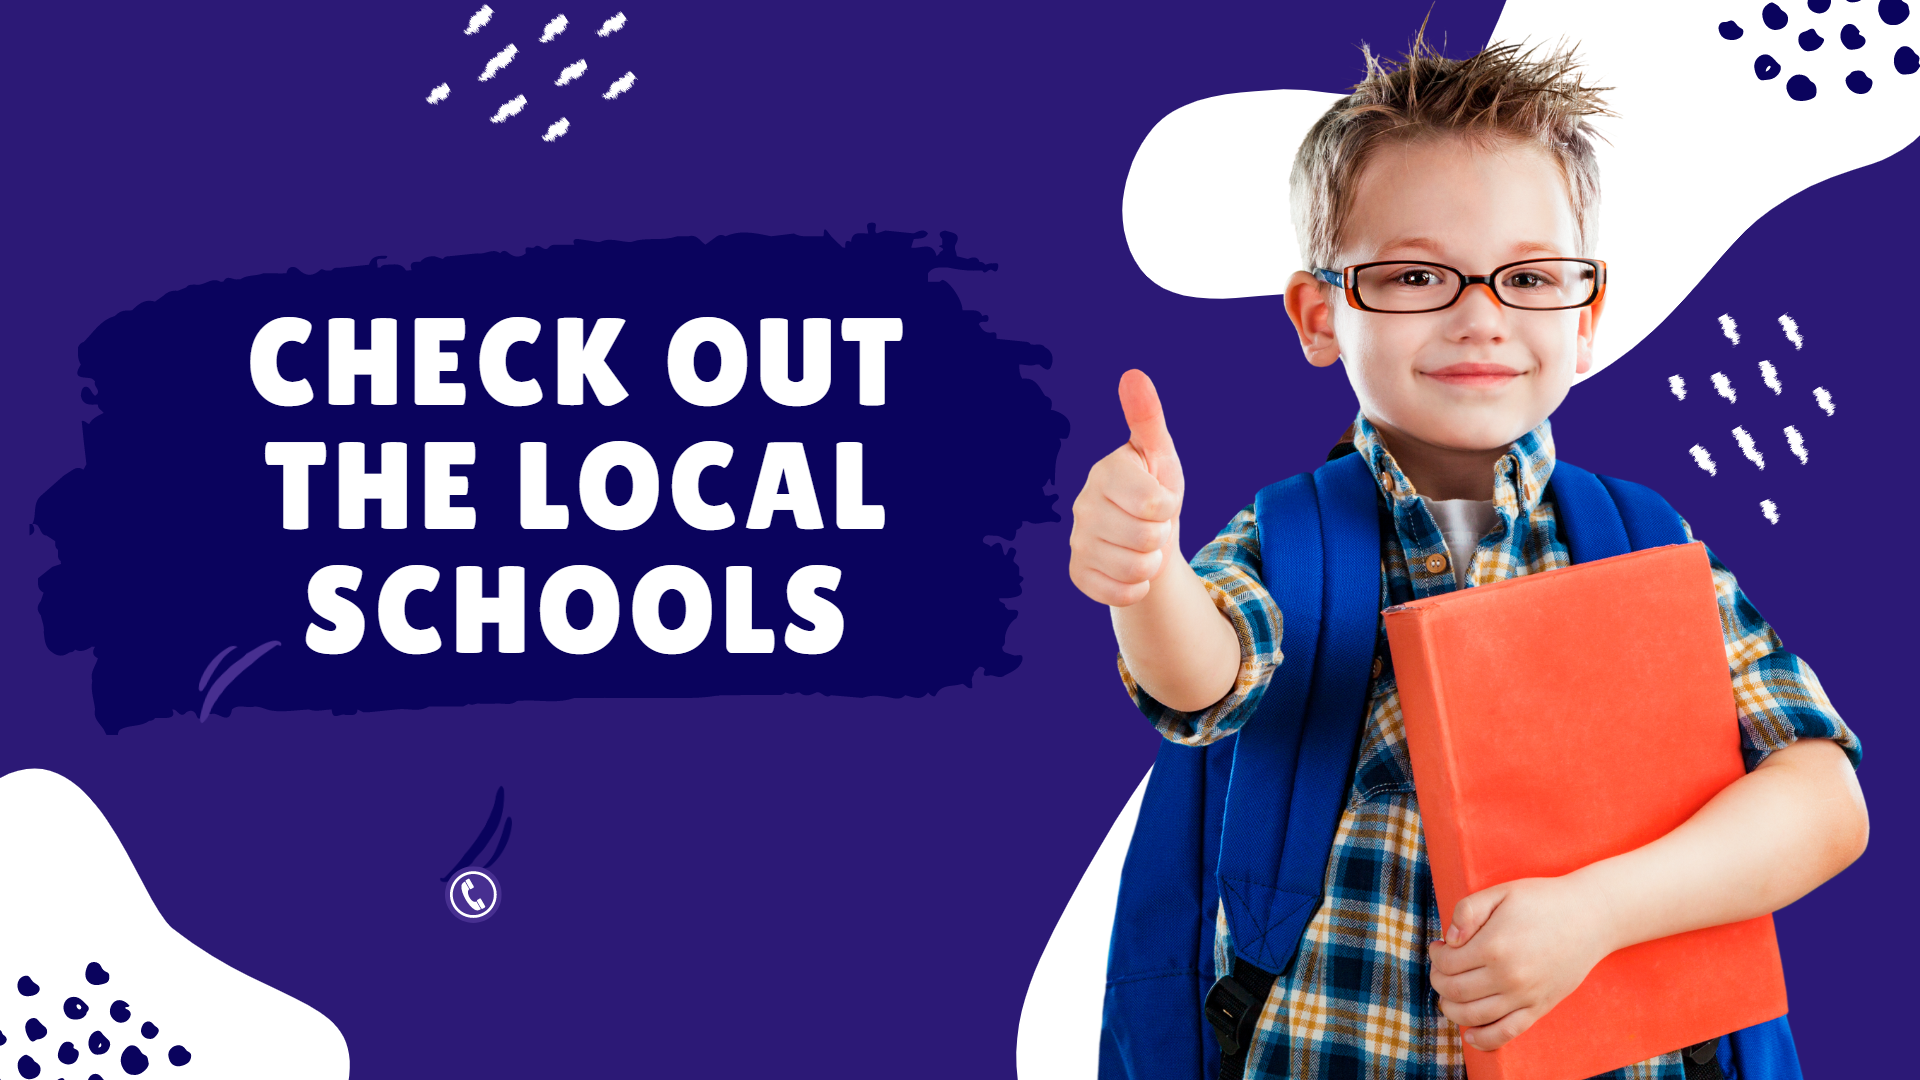 Check Out the Local Schools and Education Resources